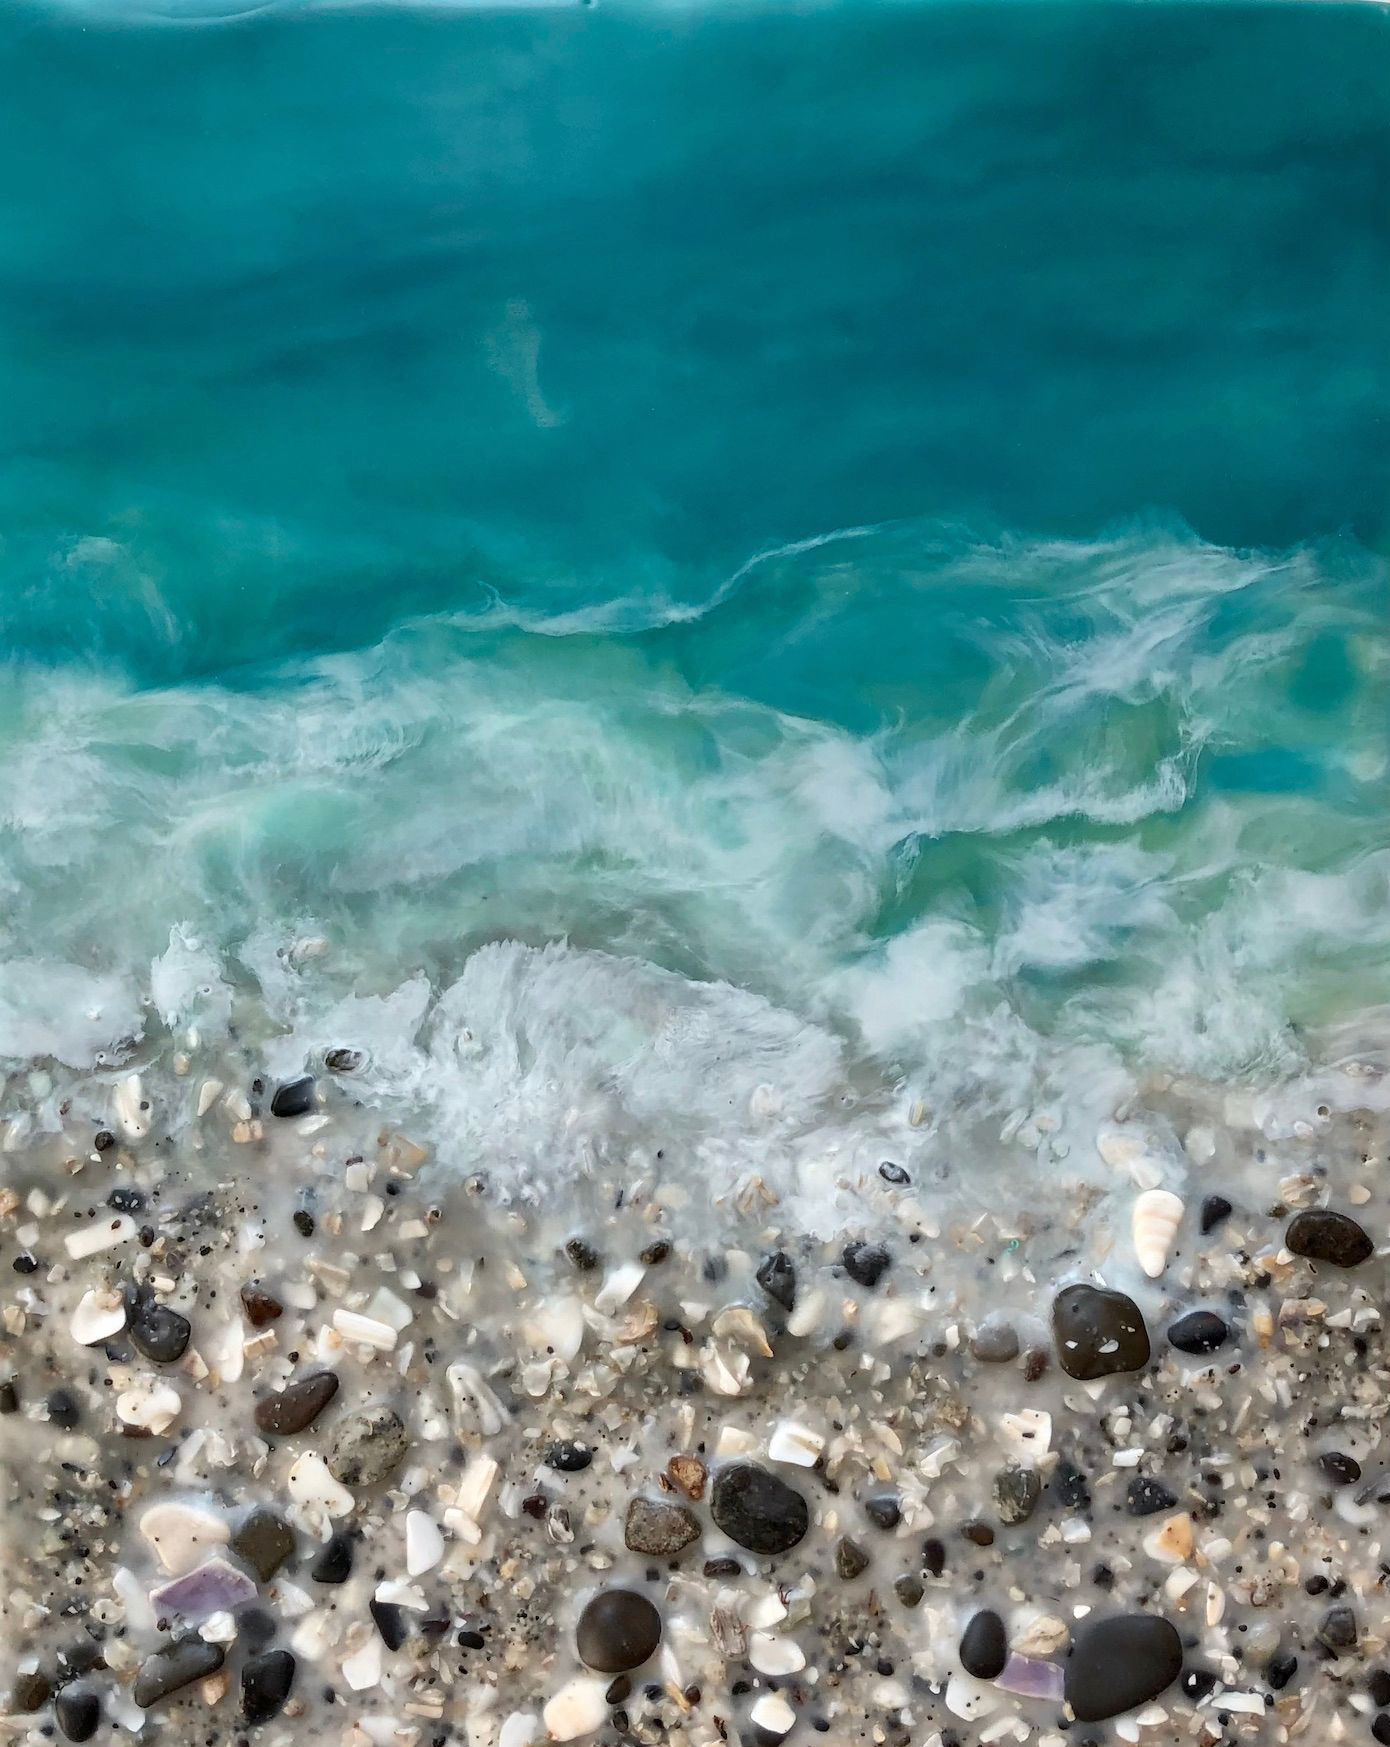 Original encaustic painting of a turquoise ocean with a real, textured sand, rock, and shell beach by Brenda Walker.